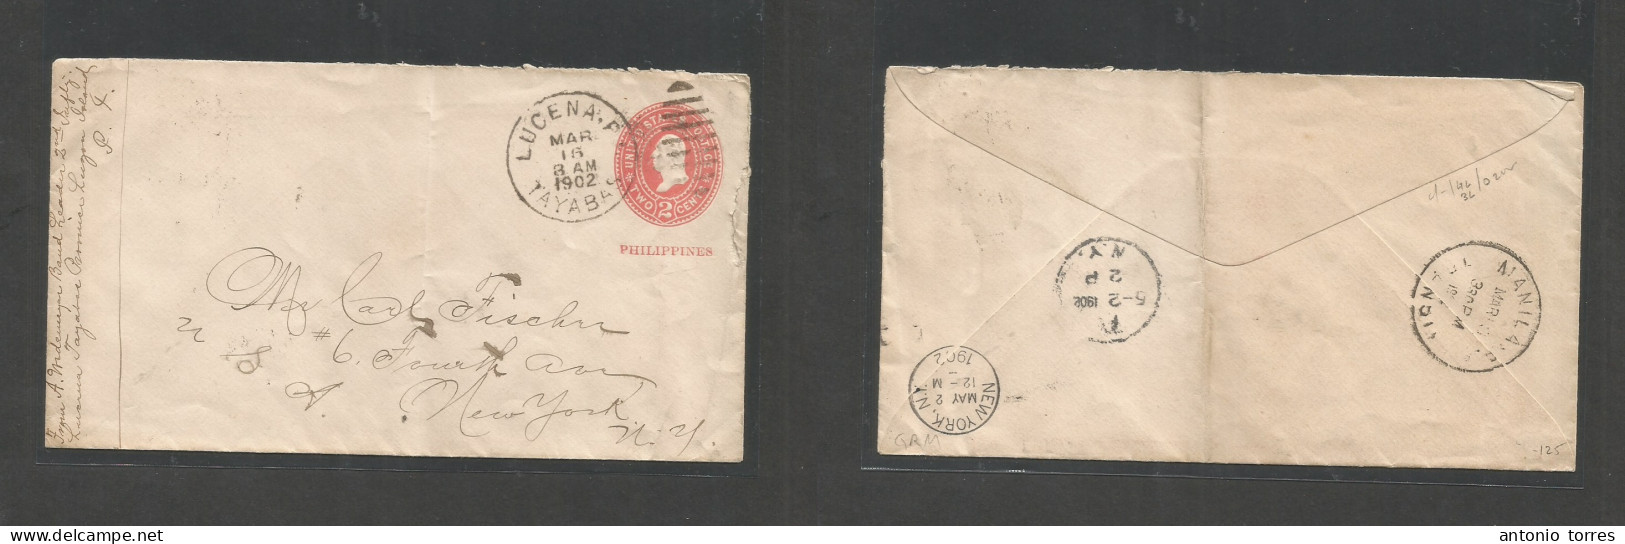 Philippines. 1902 (16 March) US Mail Admin. Lucena, Tayabas - USA, NYC (2 May) US 2c Red Ovptd Stat Env Cds. Scarce Orig - Filipinas